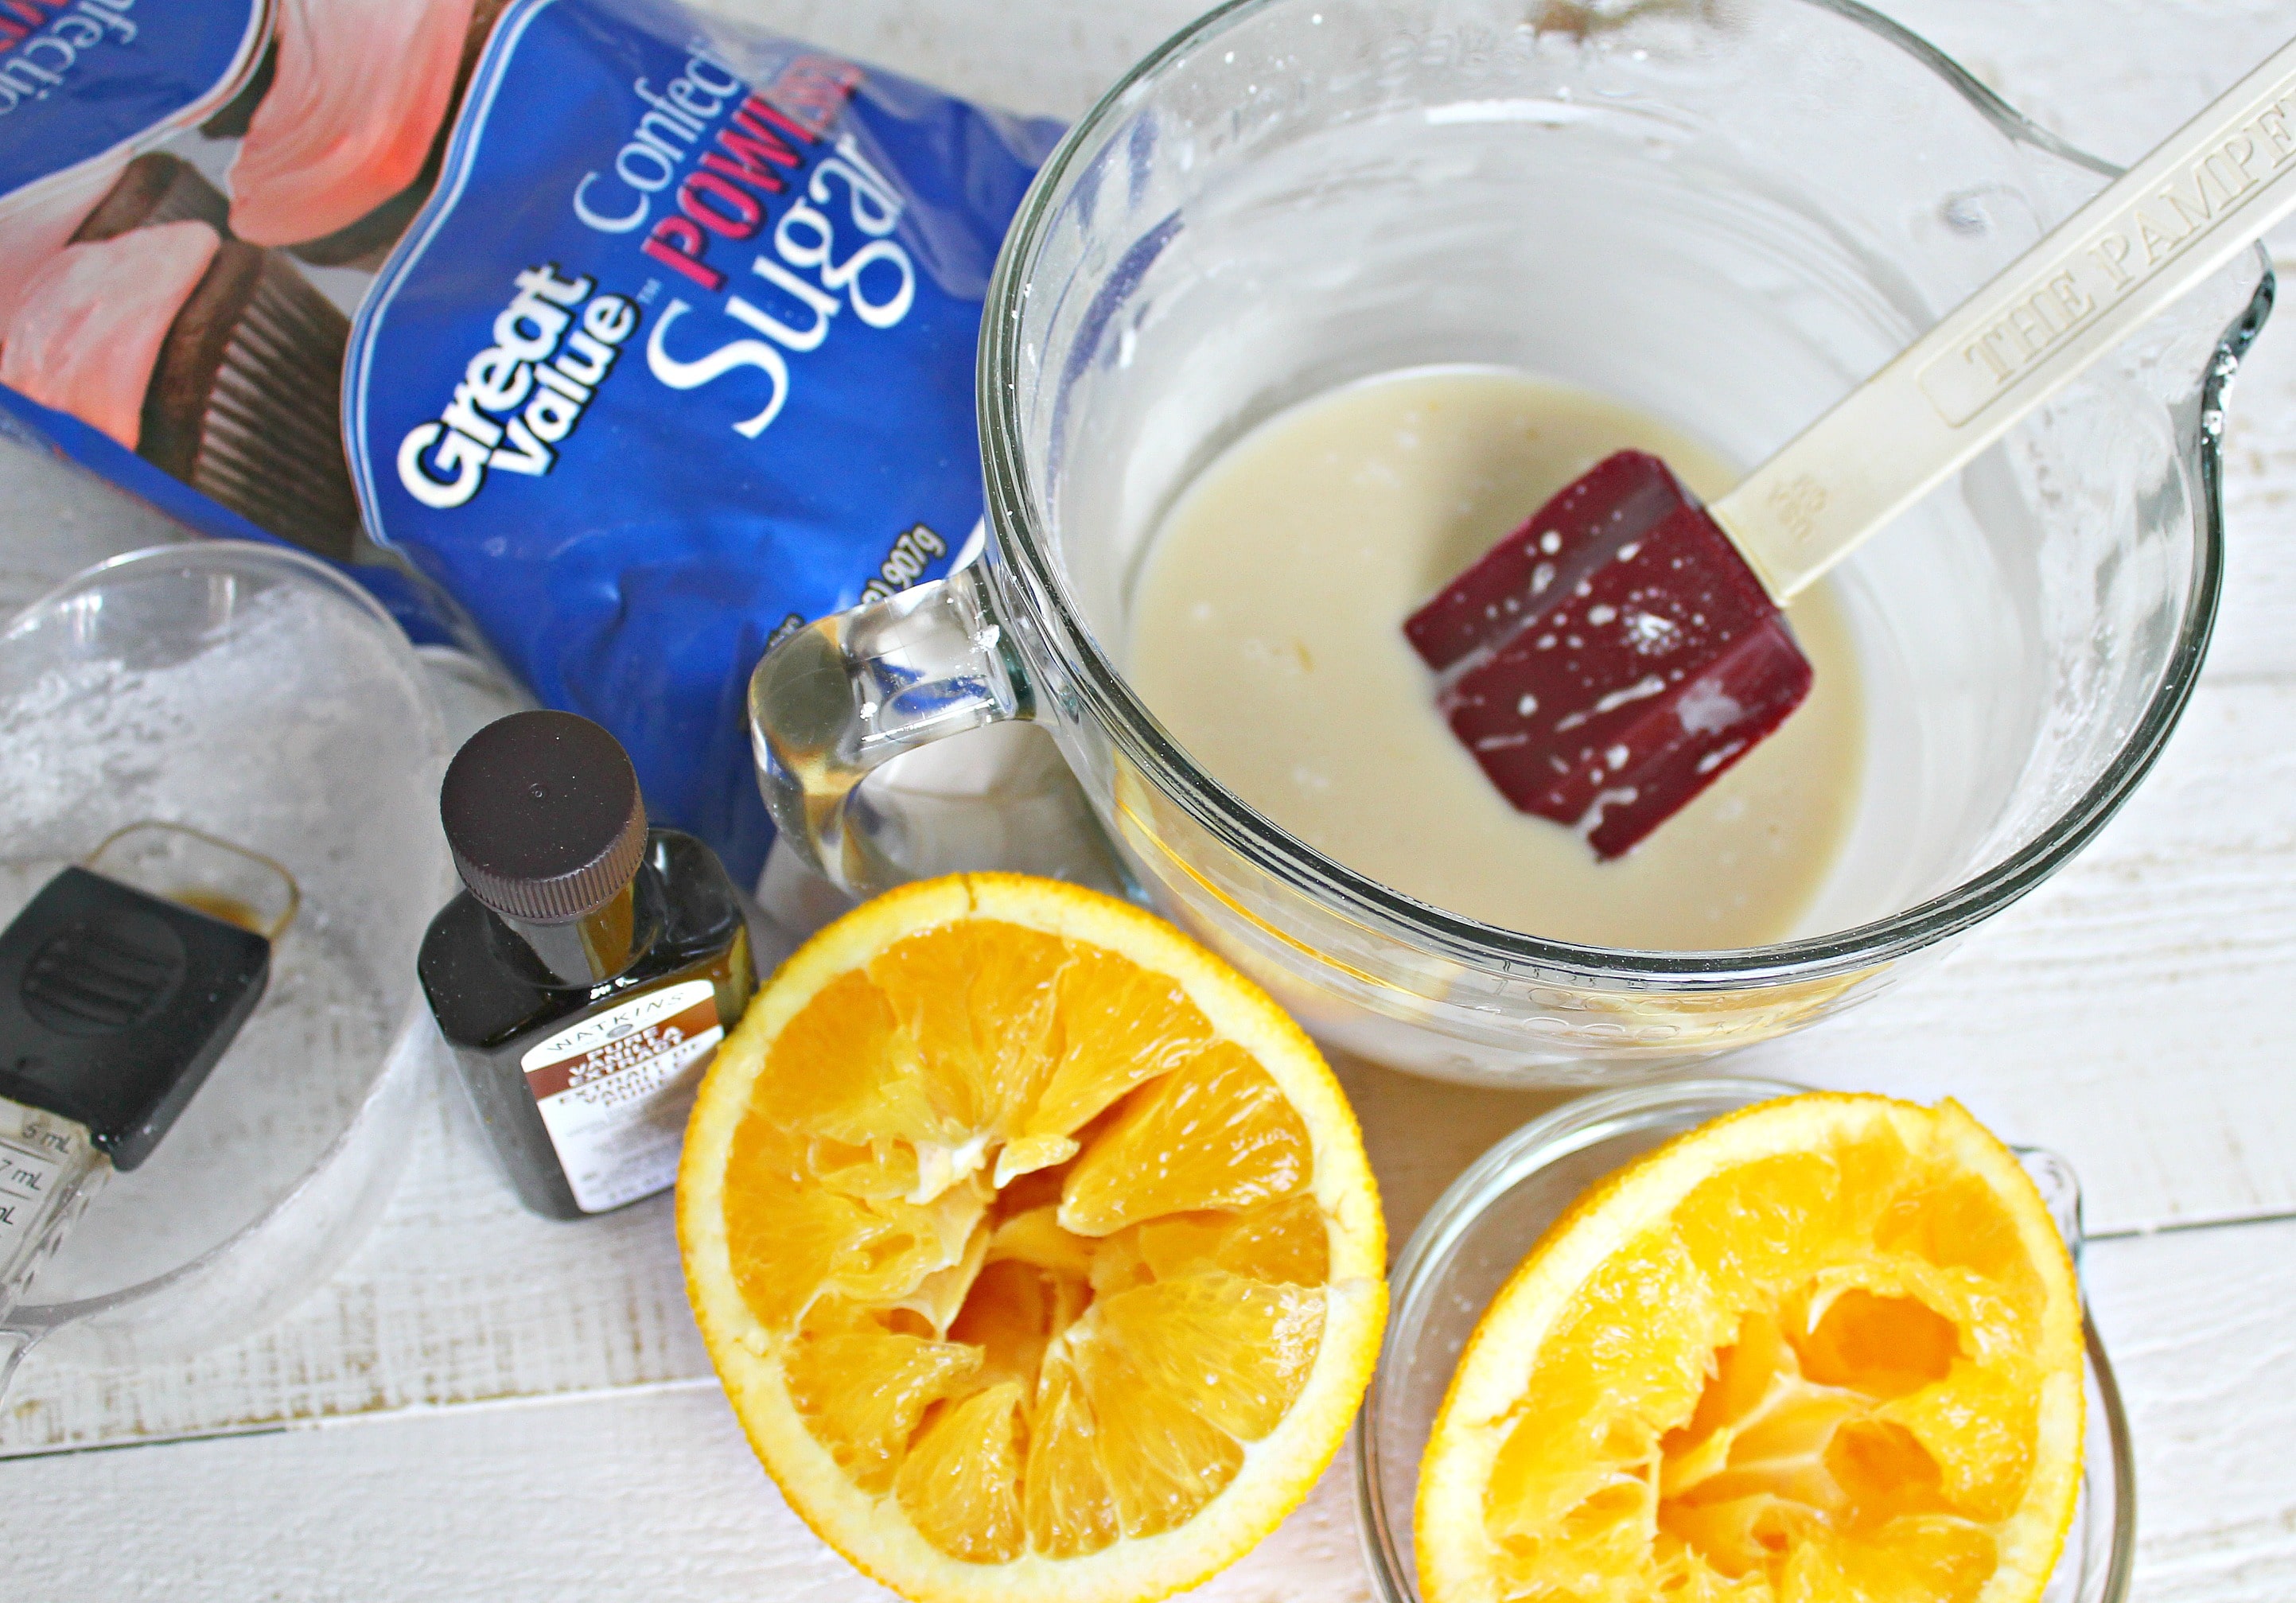 To make the syrup, add the powdered sugar, vanilla, and fresh squeezed orange juice to a bowl and whisk together. 